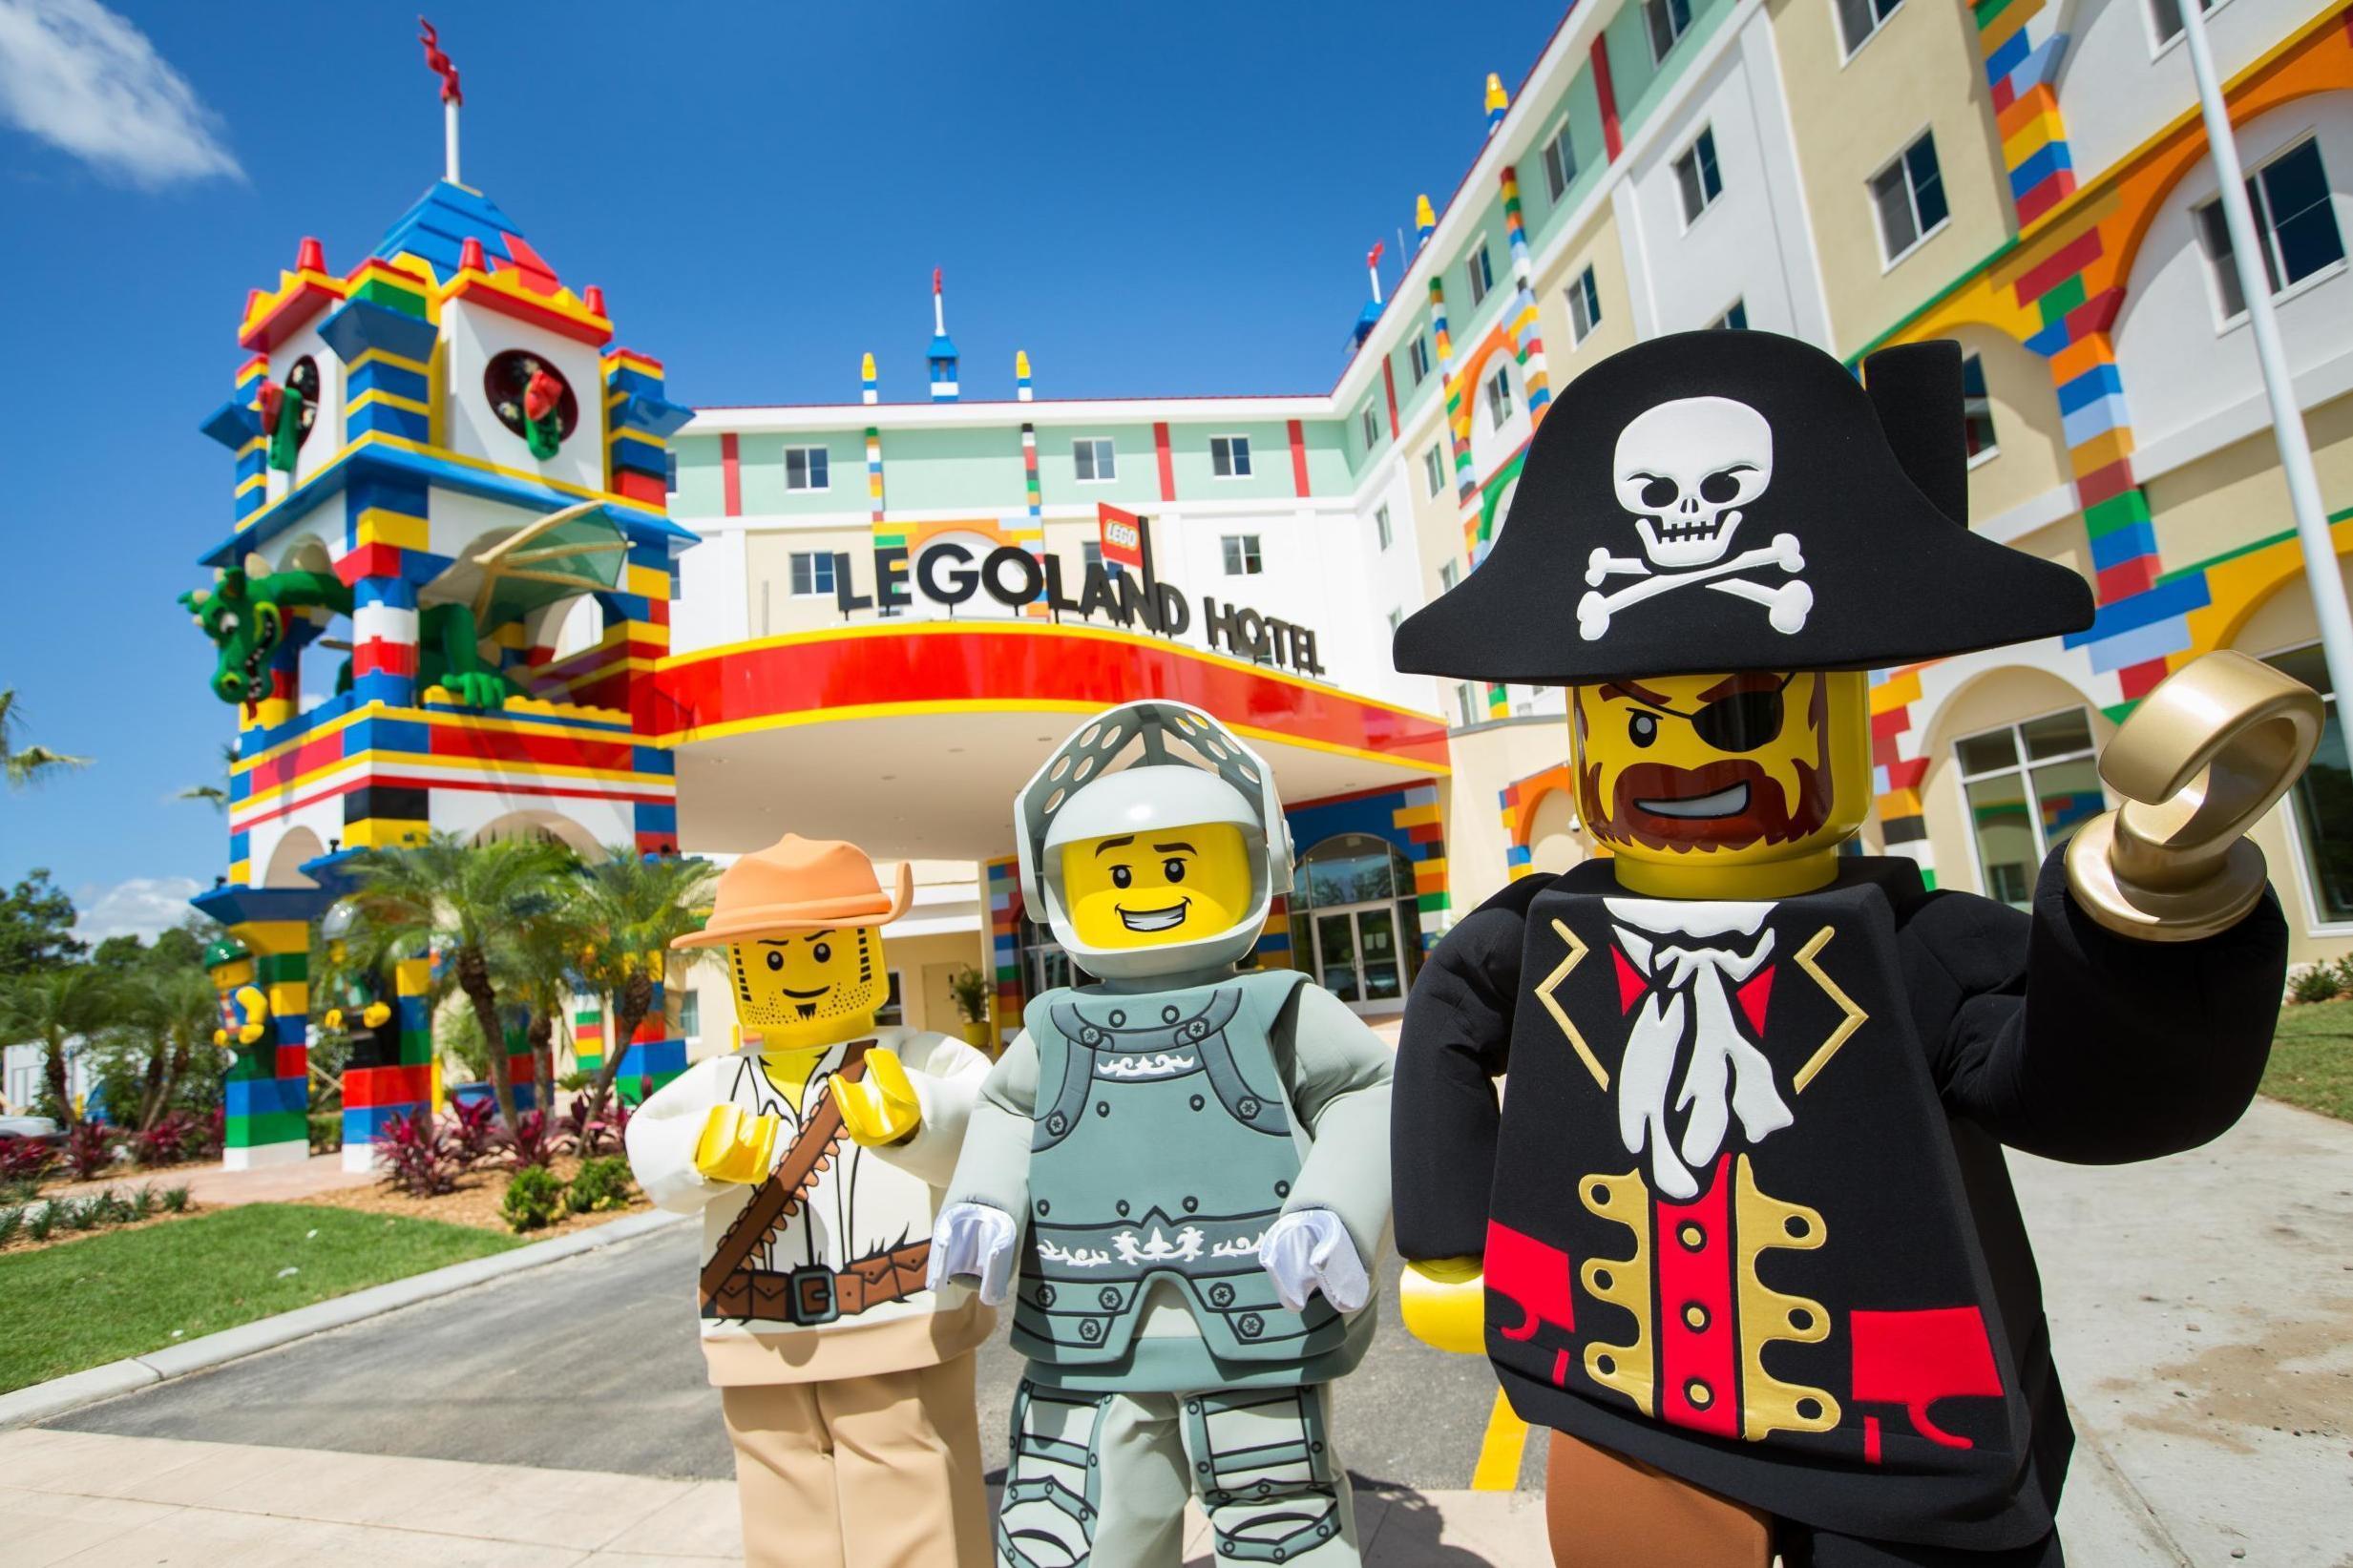 The Legoland hotel in Florida, one of the brand’s newest theme parks